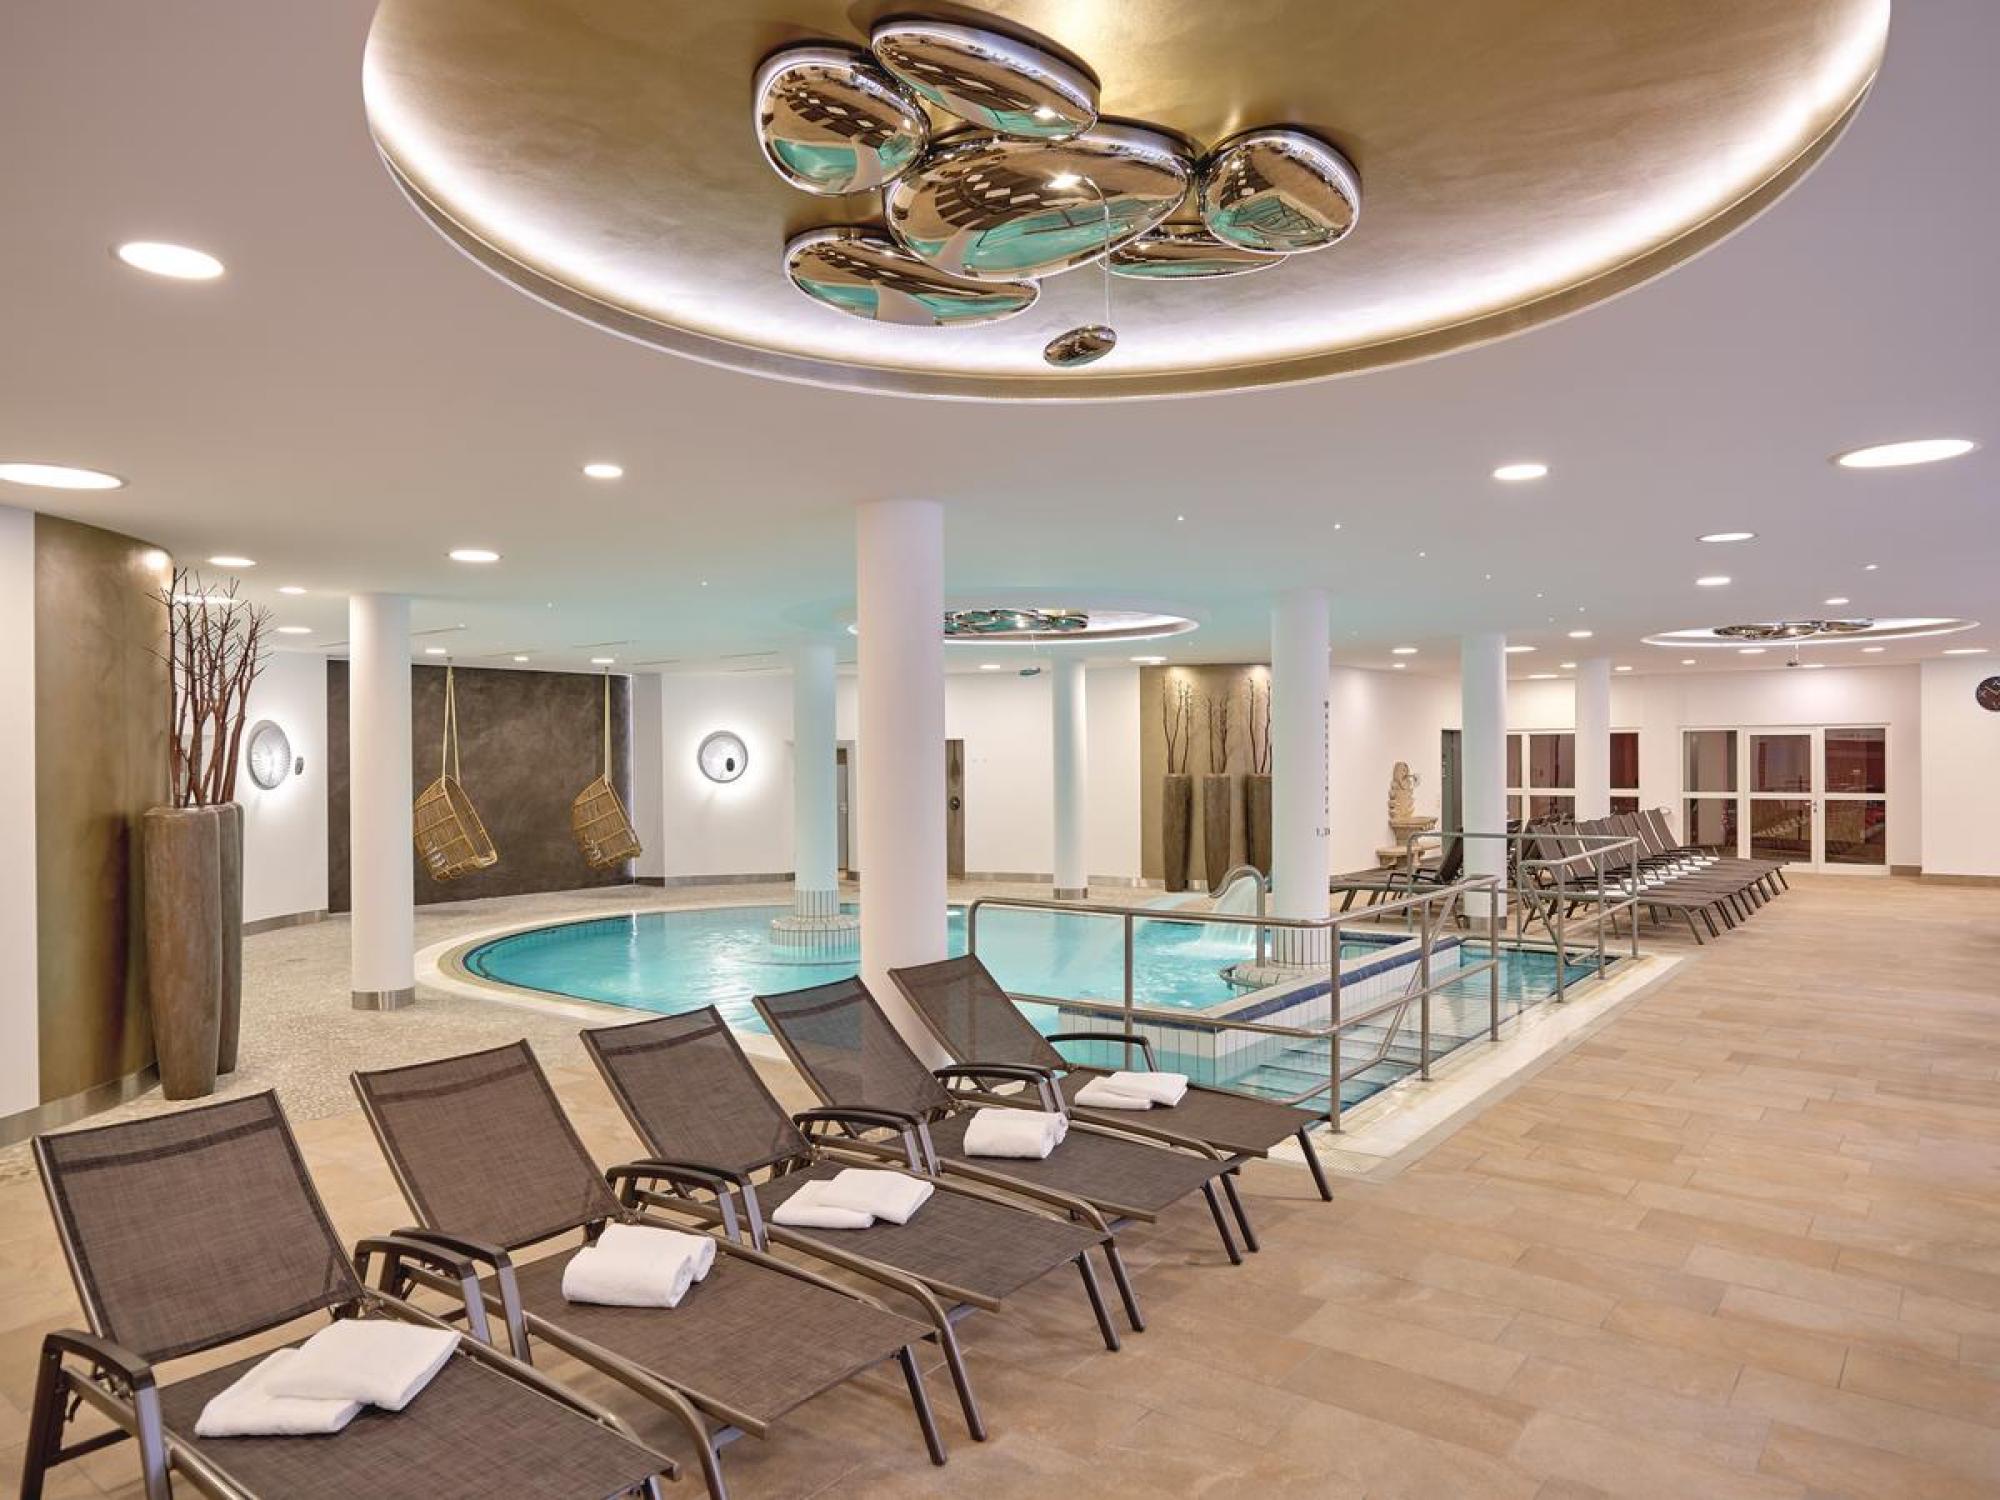 View Hotel Maximilian's picturesque indoor pool within amazing Germany.